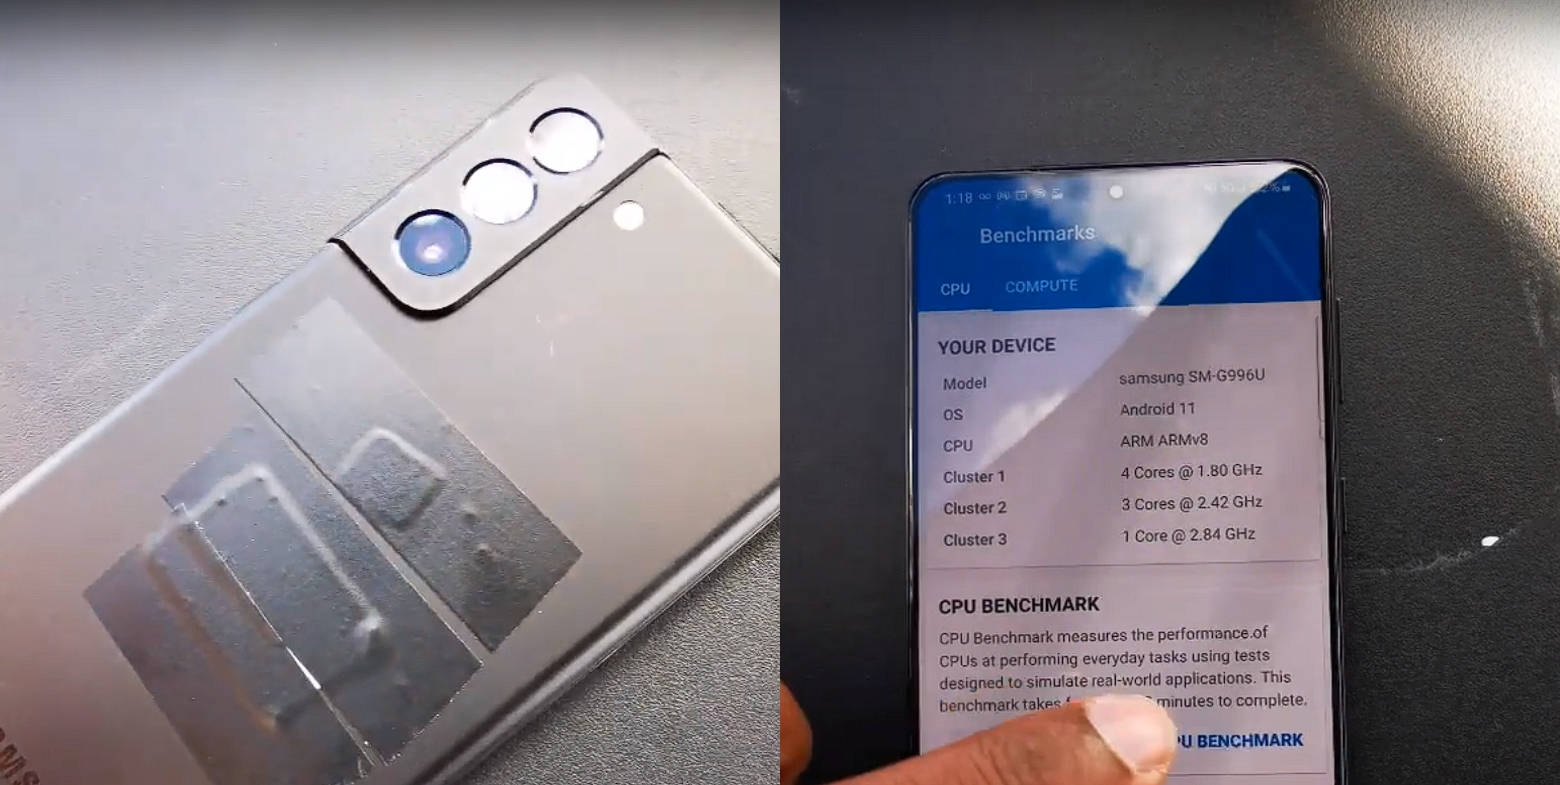 Samsung Galaxy S21 with Snapdragon 888 shown off in hands-on video as European memory and colour configurations leak - NotebookCheck.net News